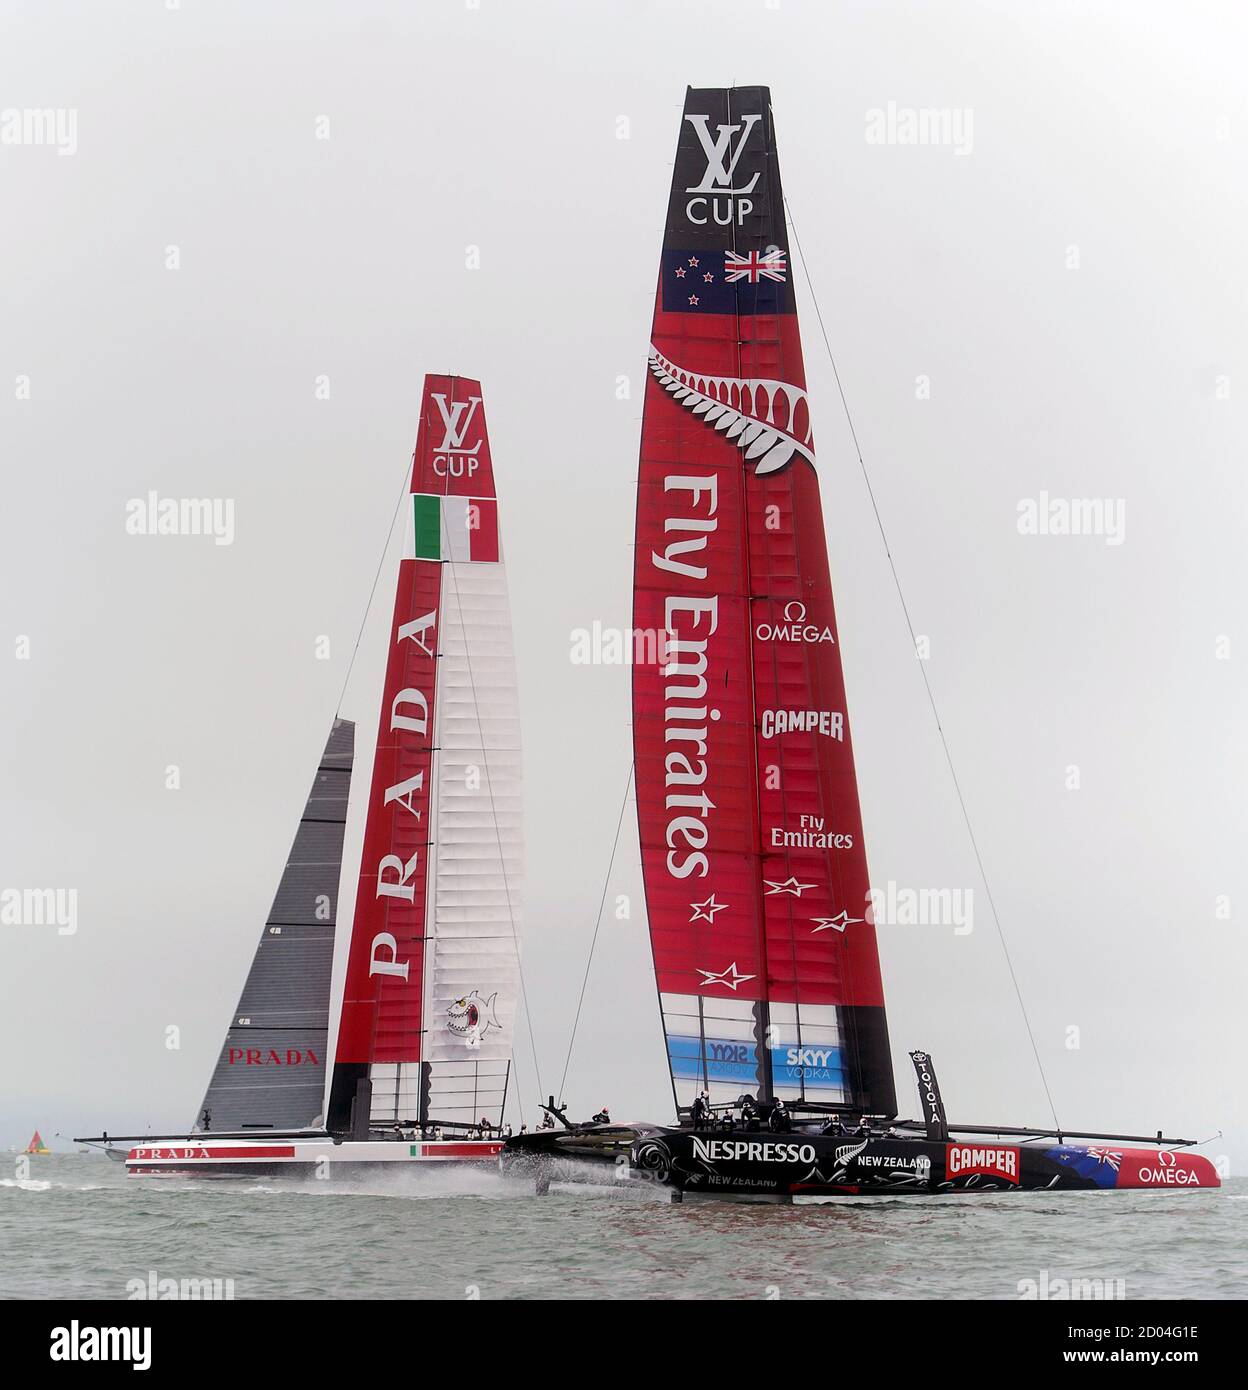 Emirates Team New Zealand (R) leads Italy's Luna Rossa Challenge while  competing in the Louis Vuitton Cup round robin in San Francisco, California  July 21, 2013. Despite having to jettison its jib